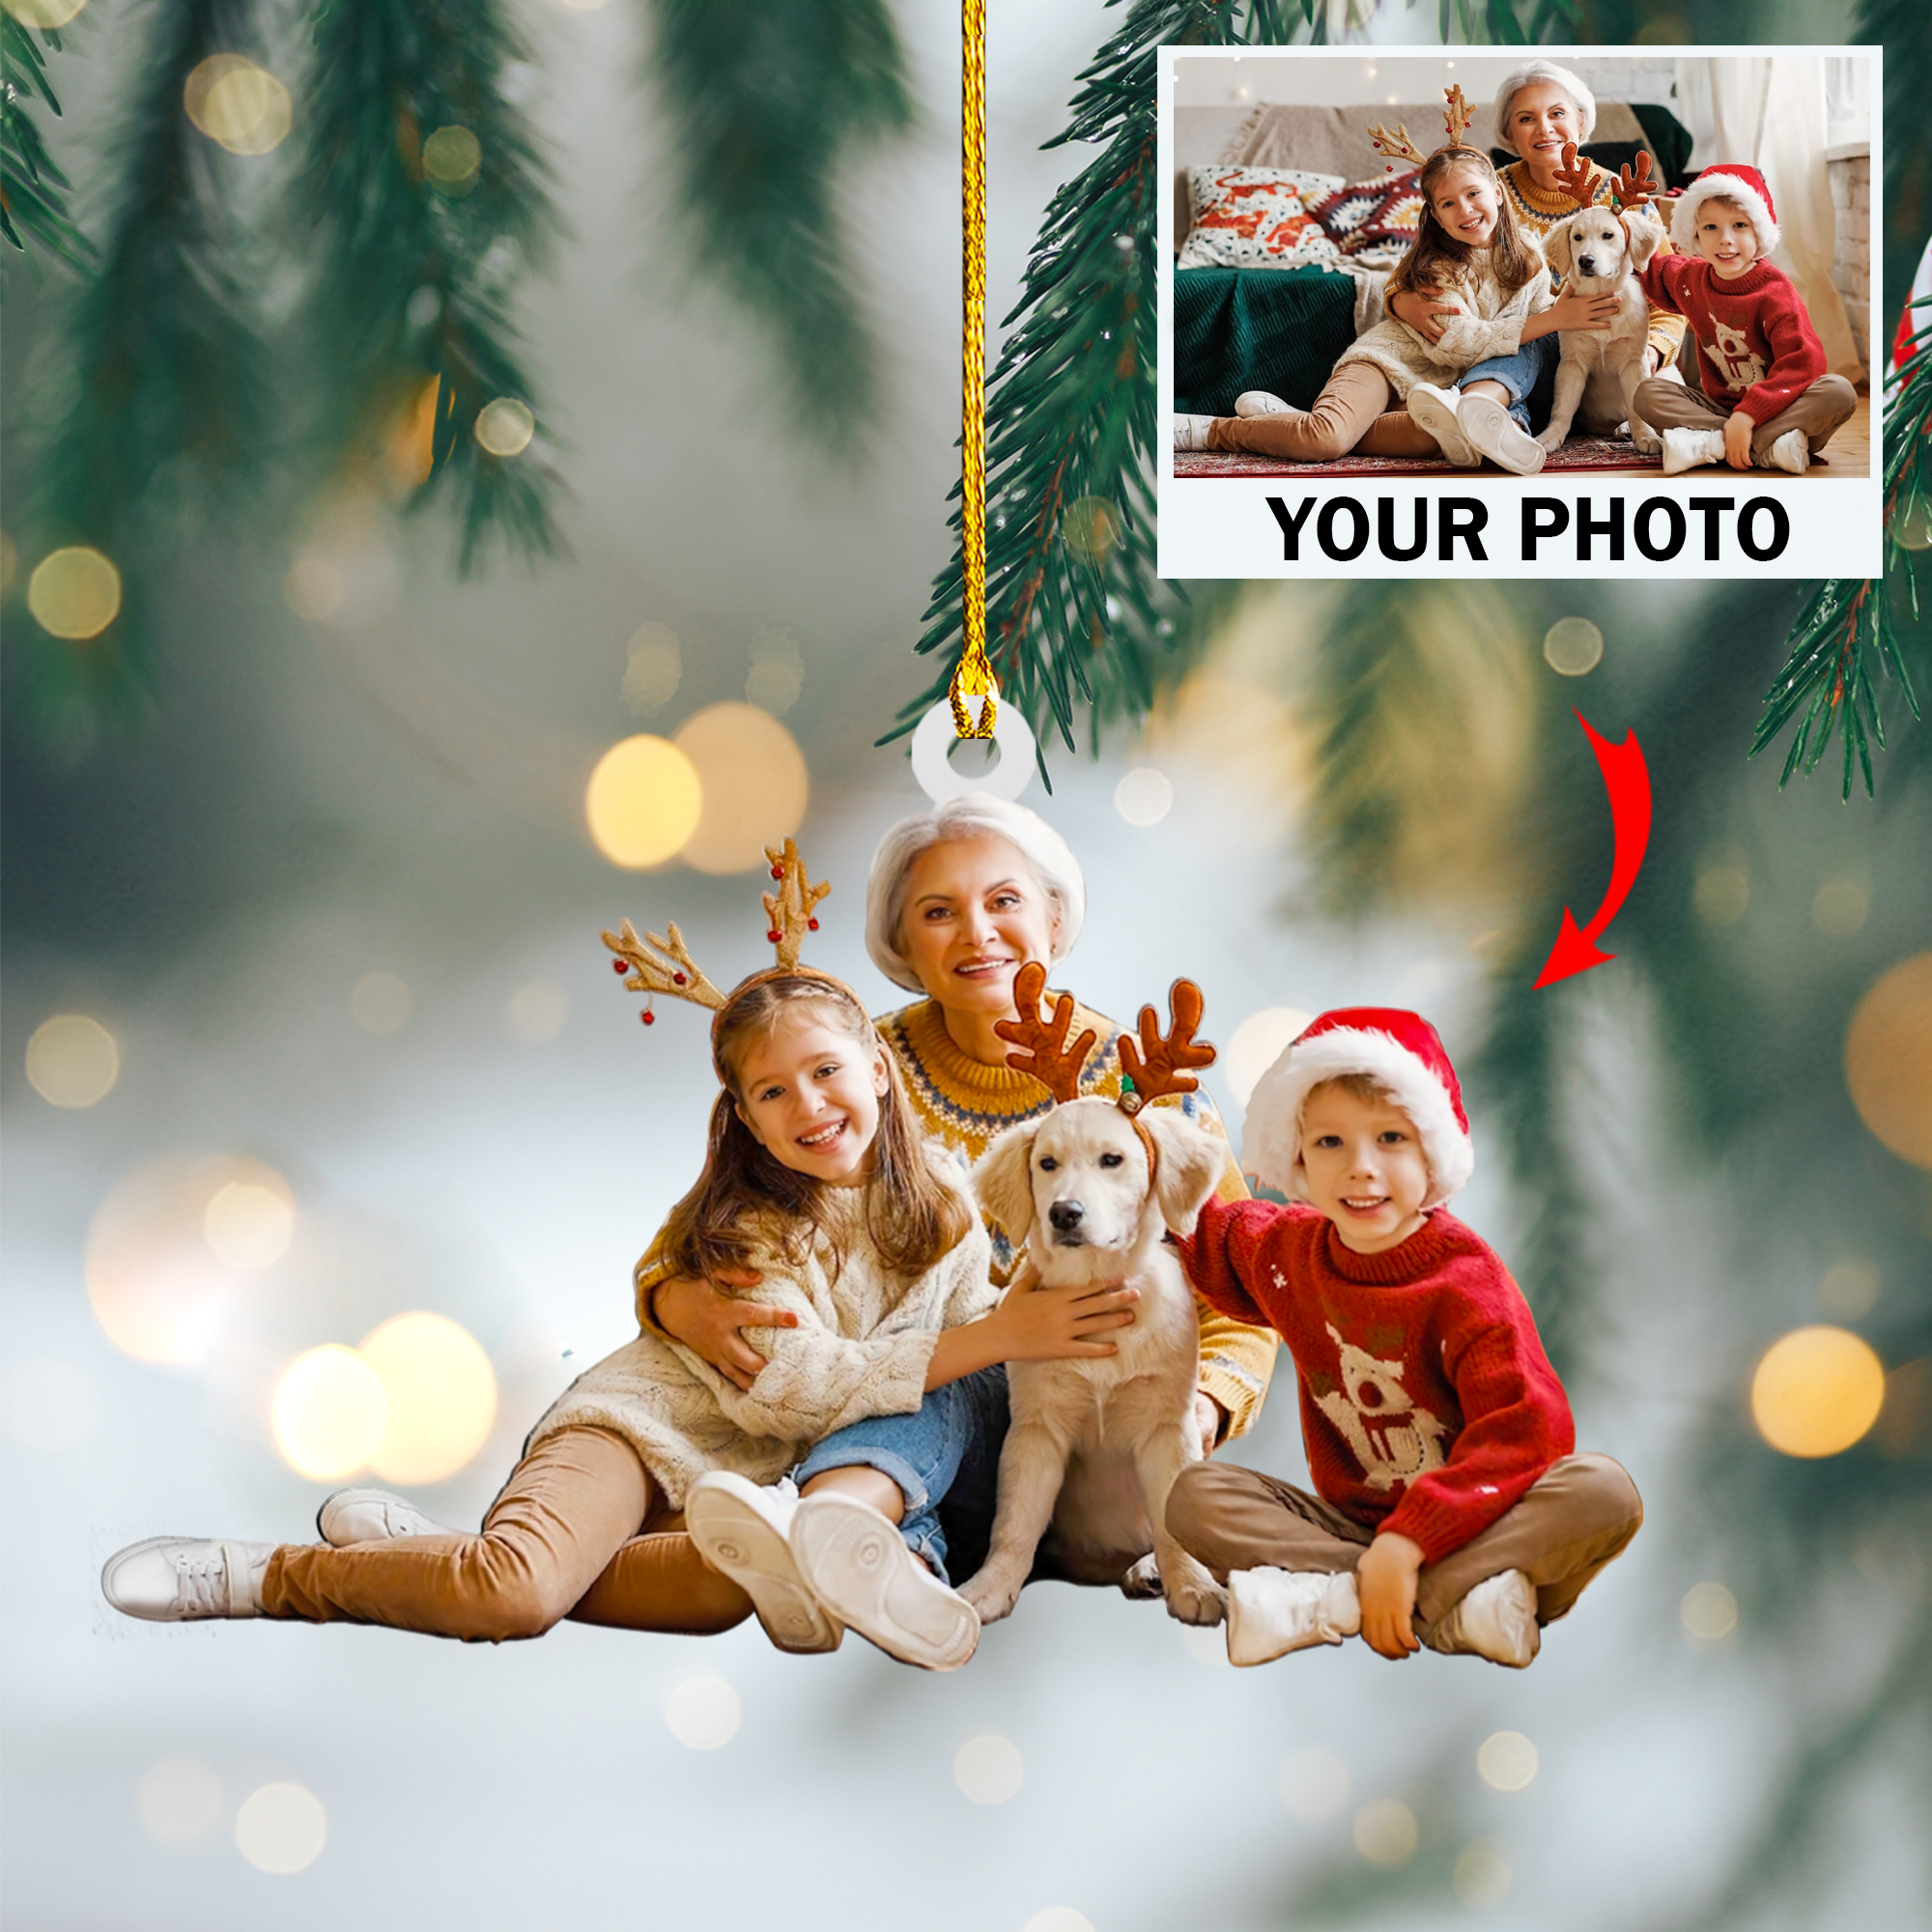 Customized Your Photo Ornament - Personalized Photo Mica Ornament - Christmas Gifts For Bestie, Sister | Friend